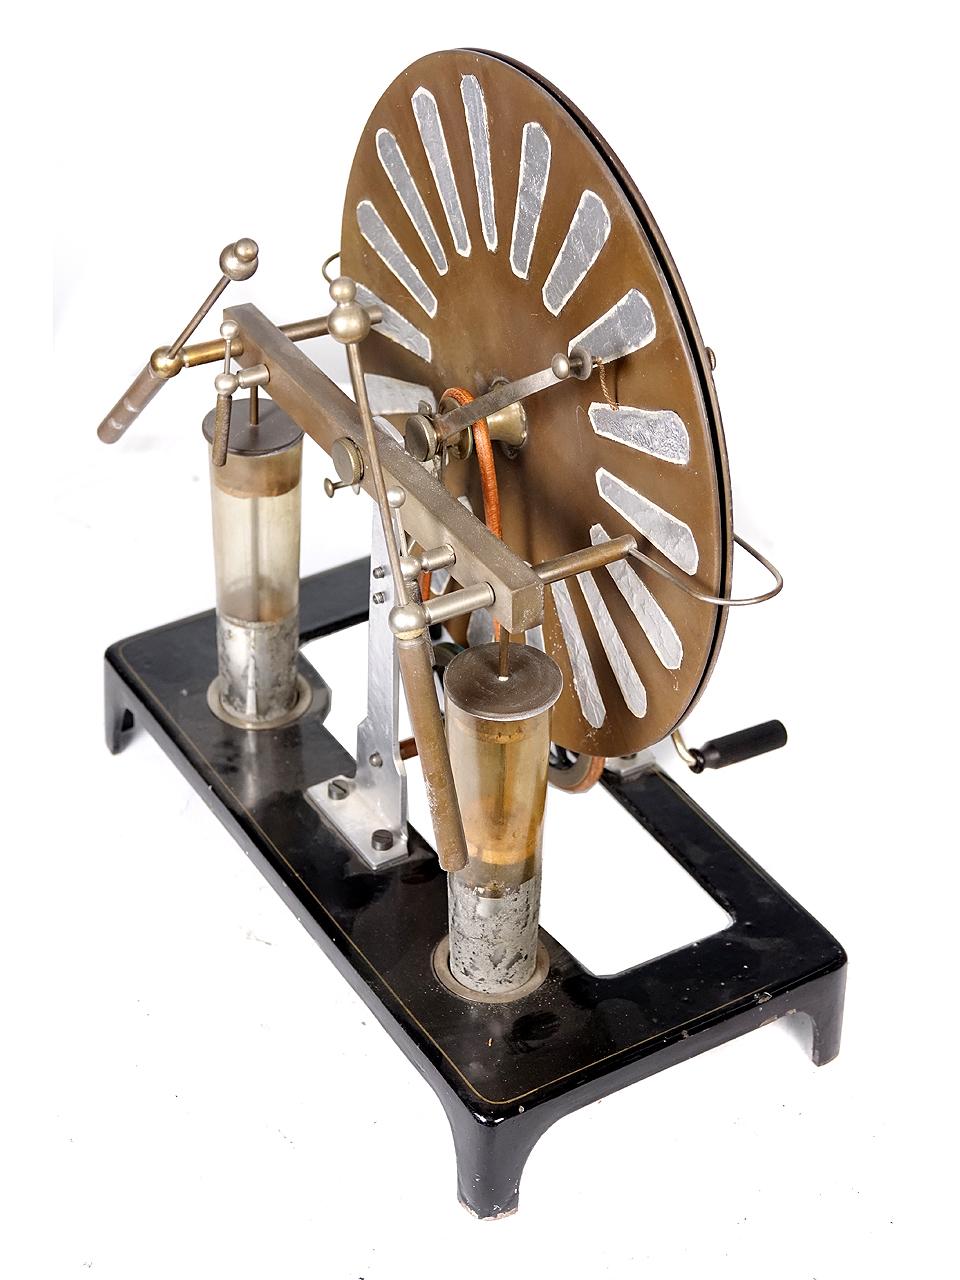 This is a small rare Edwardian Period Wimshurst Machine that is totally complete with the exception one tinfoil contact... easily replaced. It cranks and spins easily but is untested. These smaller examples were mainly used for classroom